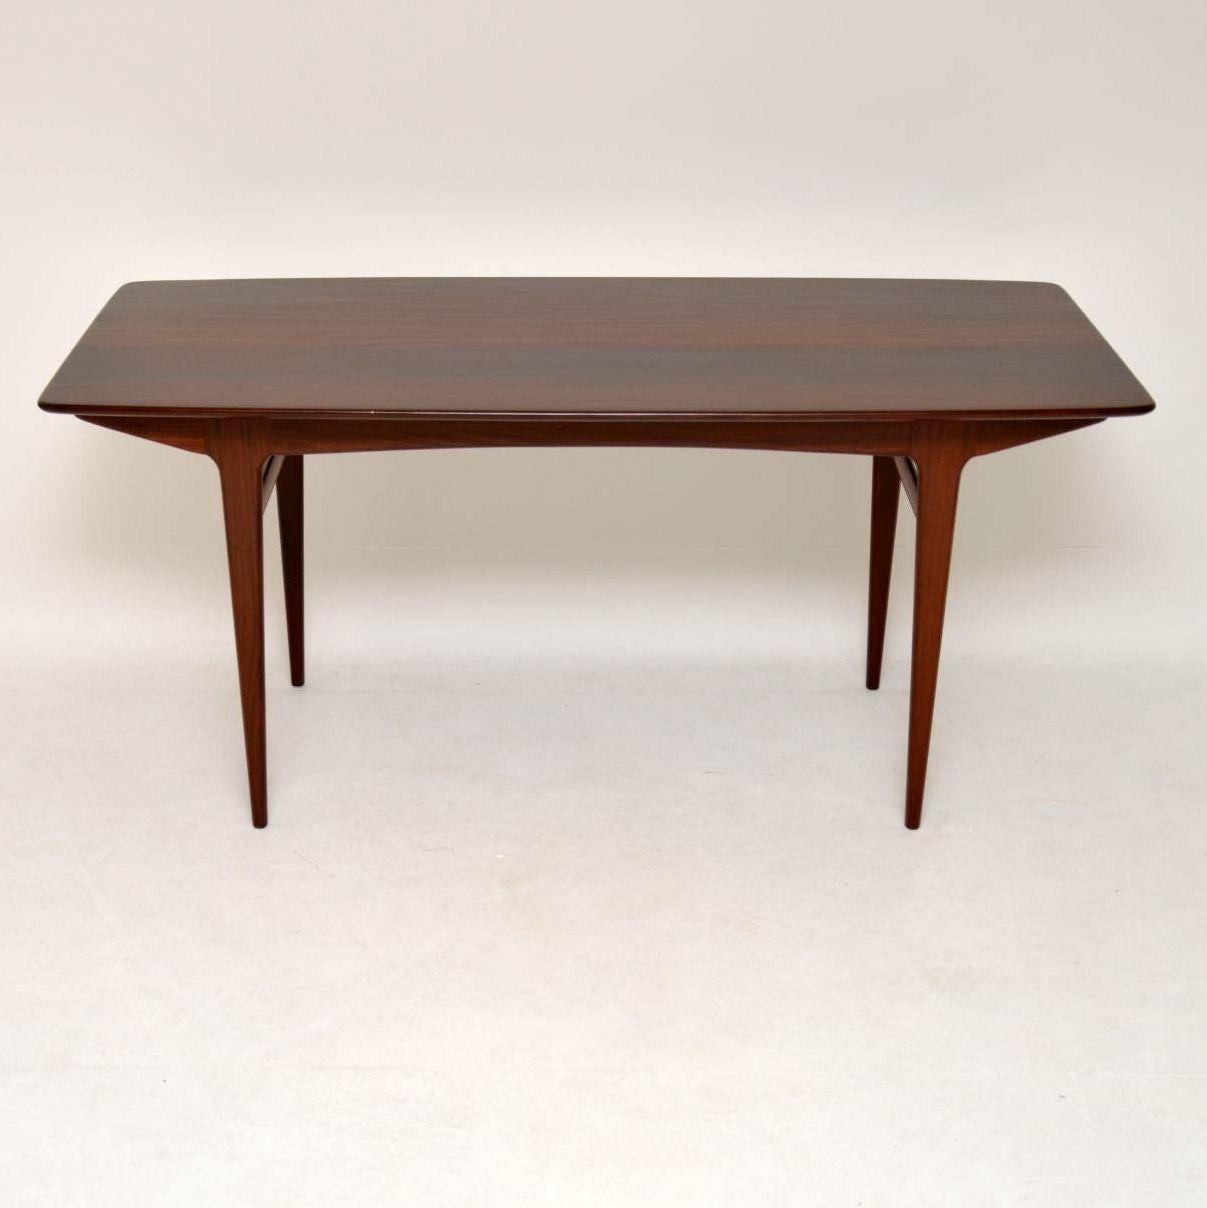 A stylish and extremely well made vintage dining table in solid afromosia wood, this was made by Younger furniture in the 1950s-1960s. The quality is amazing, this is a useful size, long and slim, to comfortably seat six. We have had this stripped